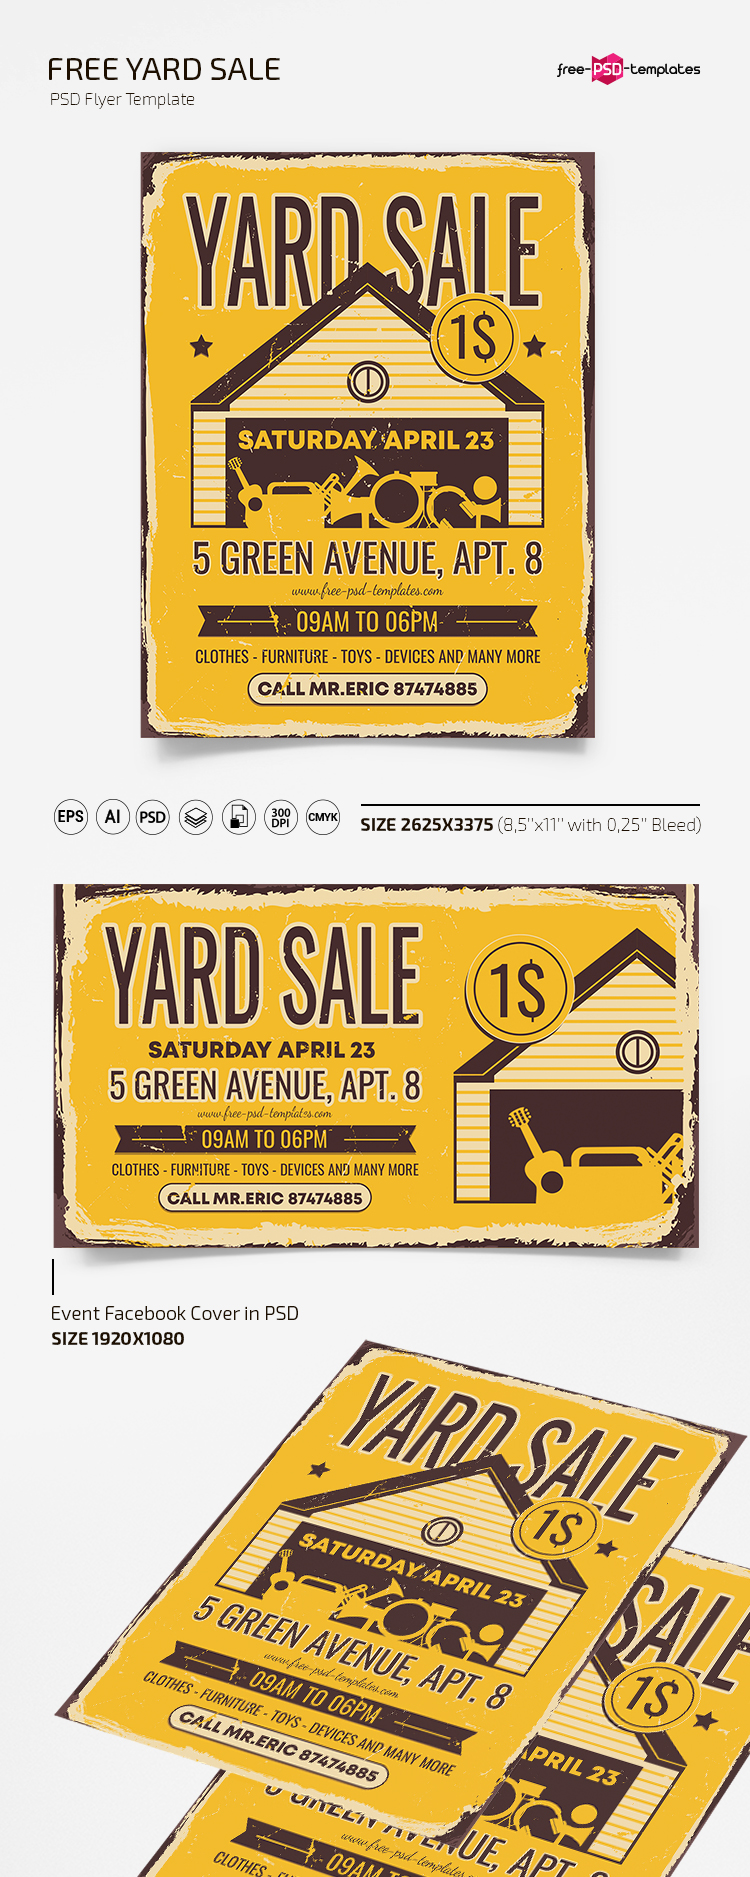 Free Yard Sale Flyer Template in PSD + AI  Free PSD Templates Throughout Yard Sale Flyers Free Templates